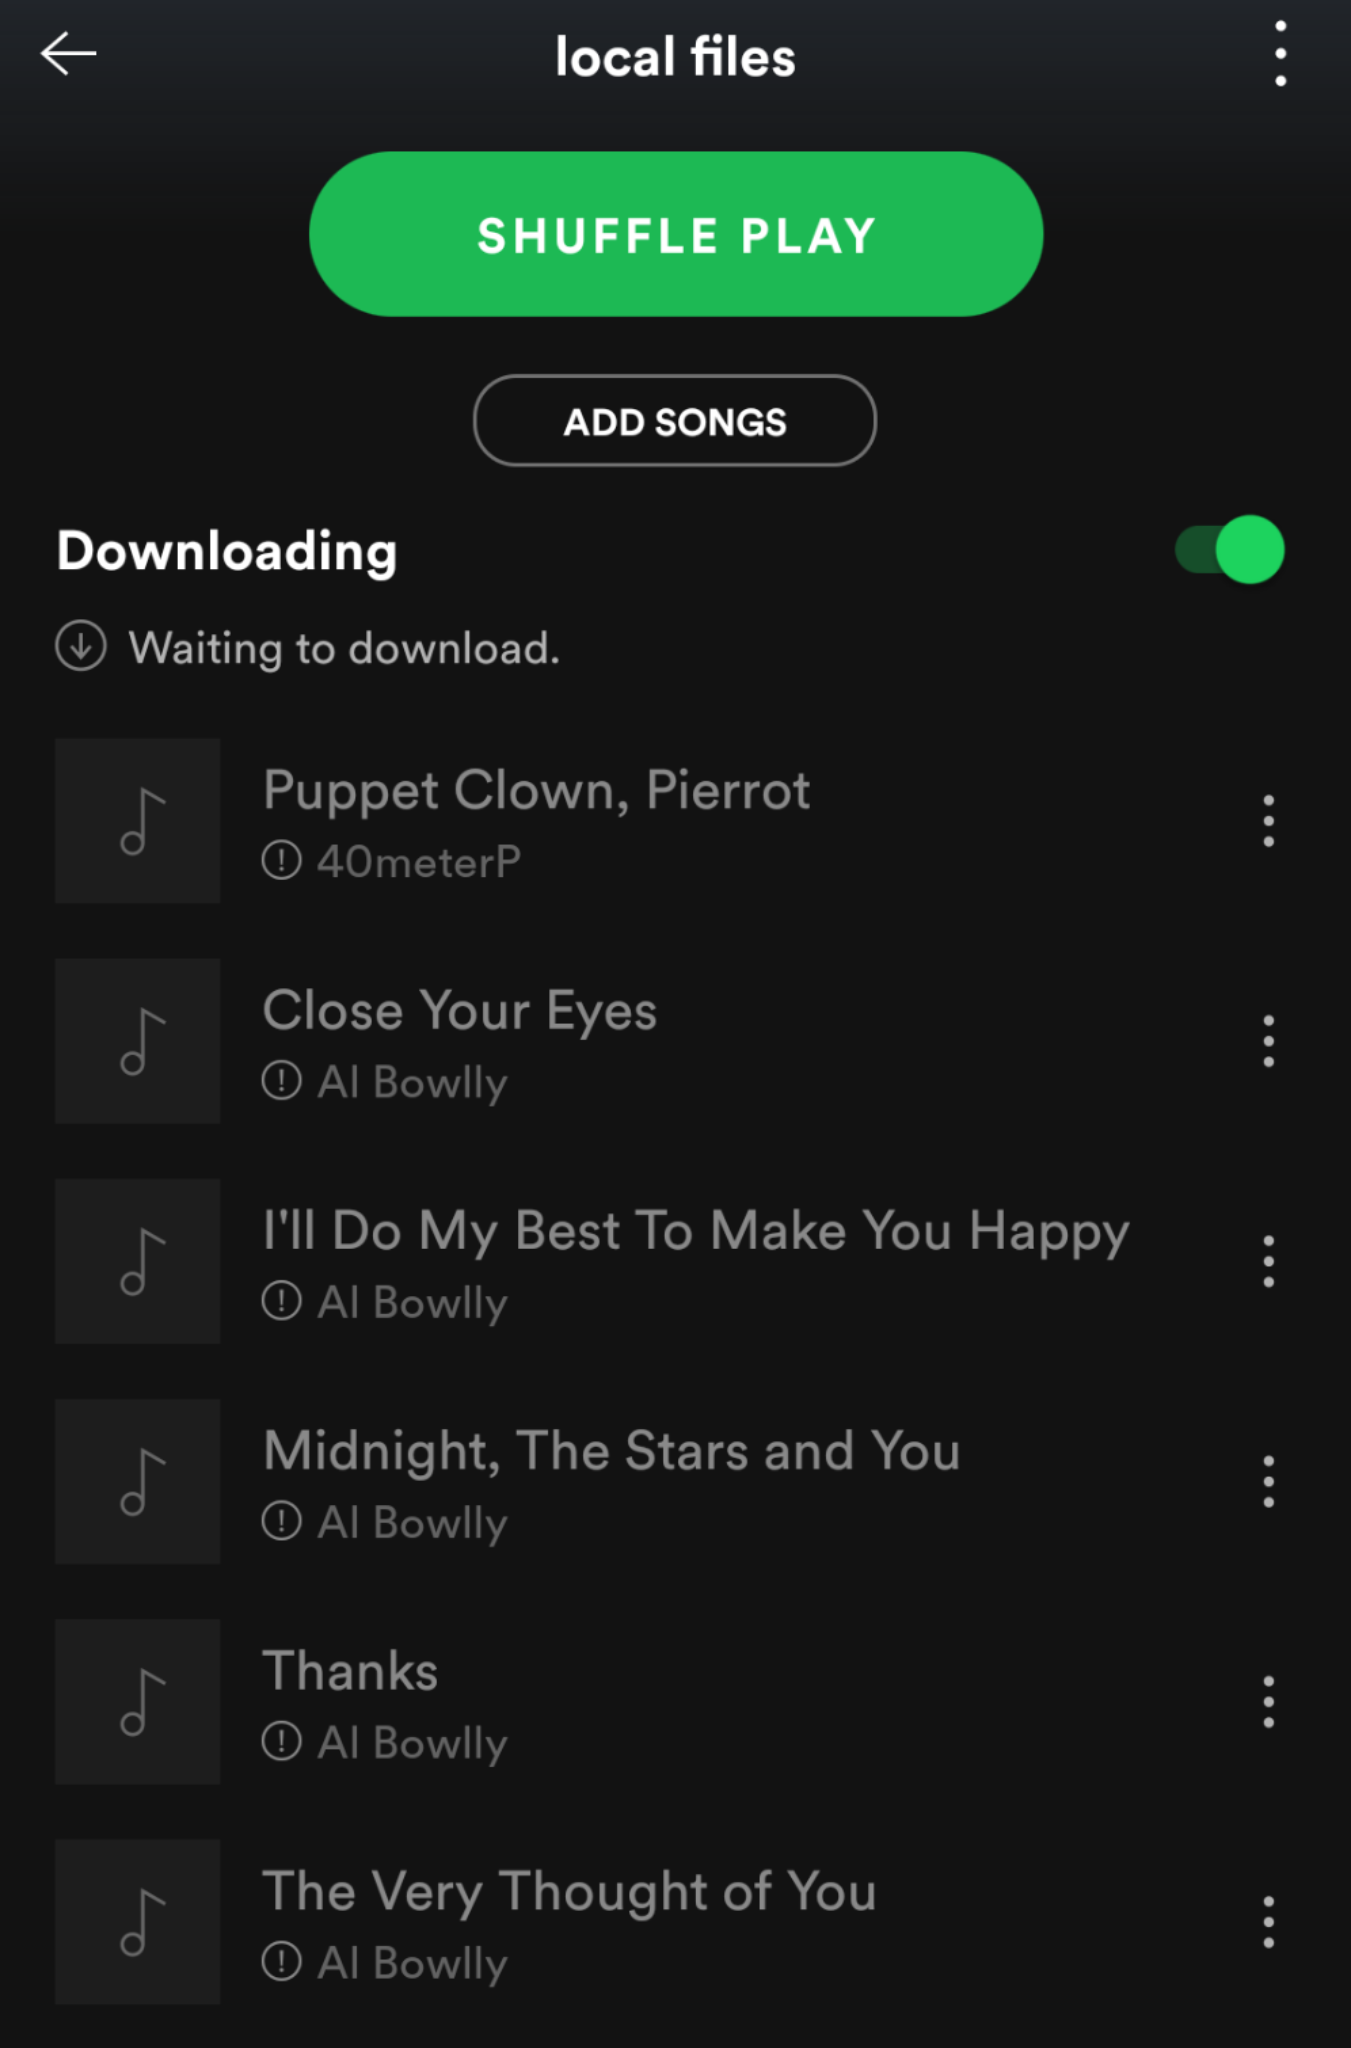 Download Local Files On Spotify